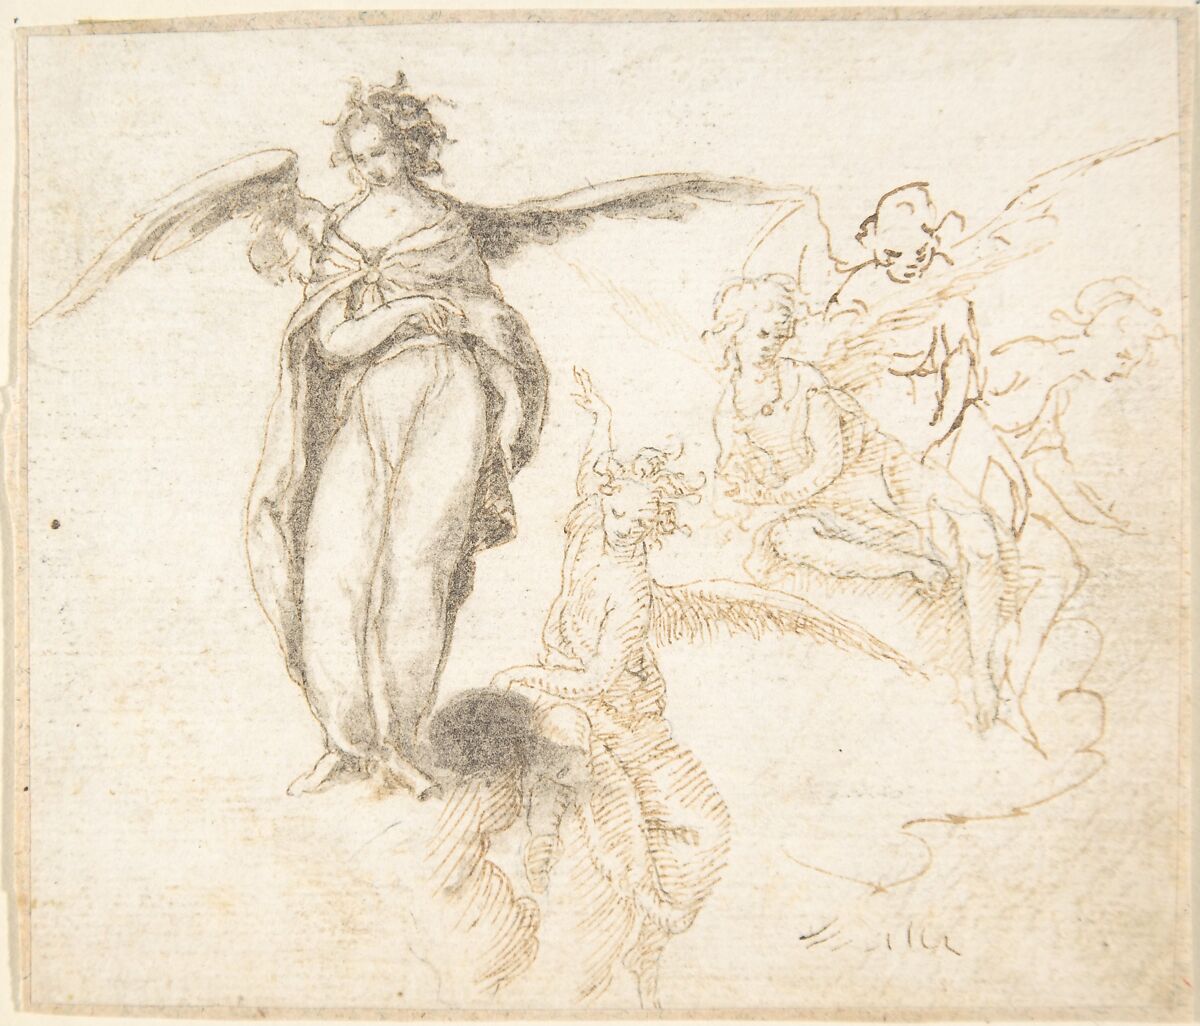 Studies for Five Figures of Angels Standing, and Seated on Clouds, Anonymous, Spanish, School of Seville, 17th century, Pen and light brown ink over black chalk. On off-white paper 